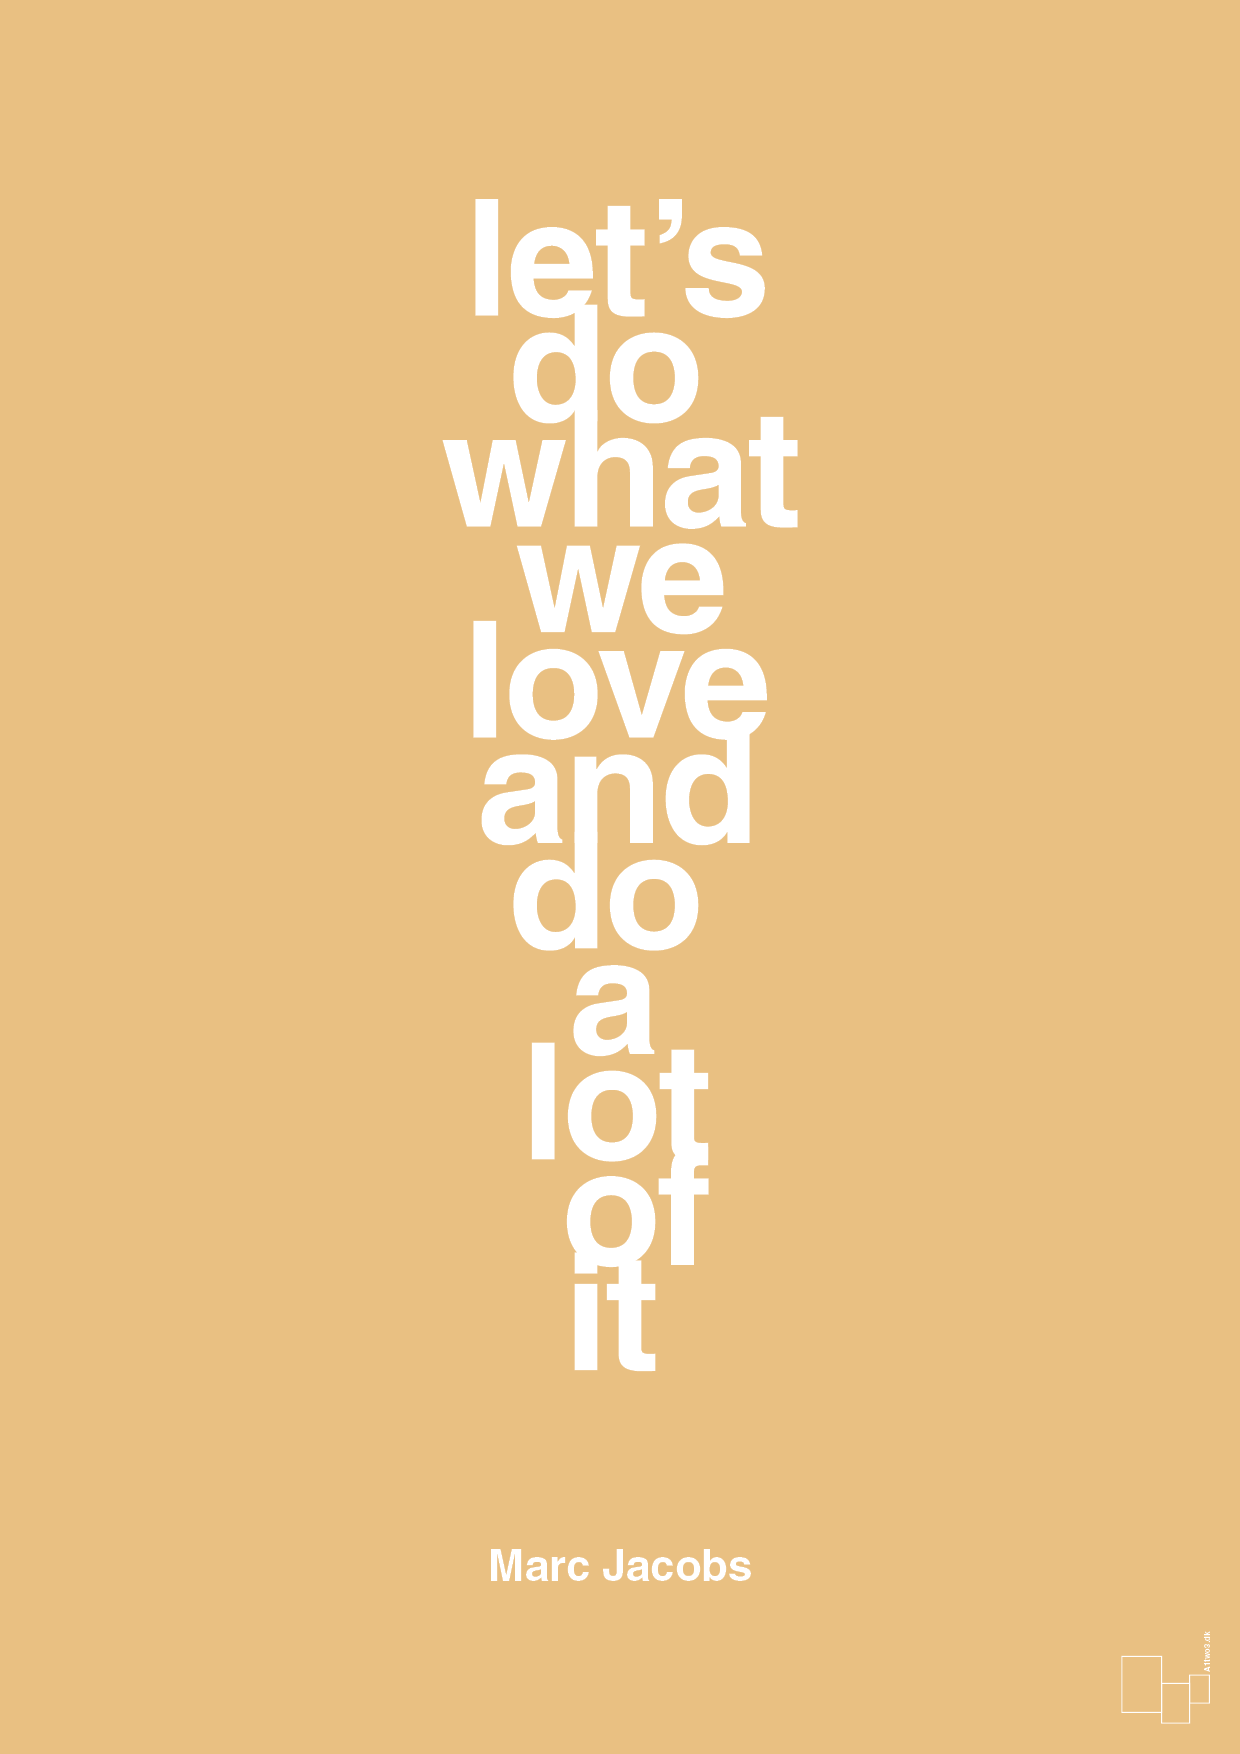 lets do what we love and do a lot of it - Plakat med Citater i Charismatic